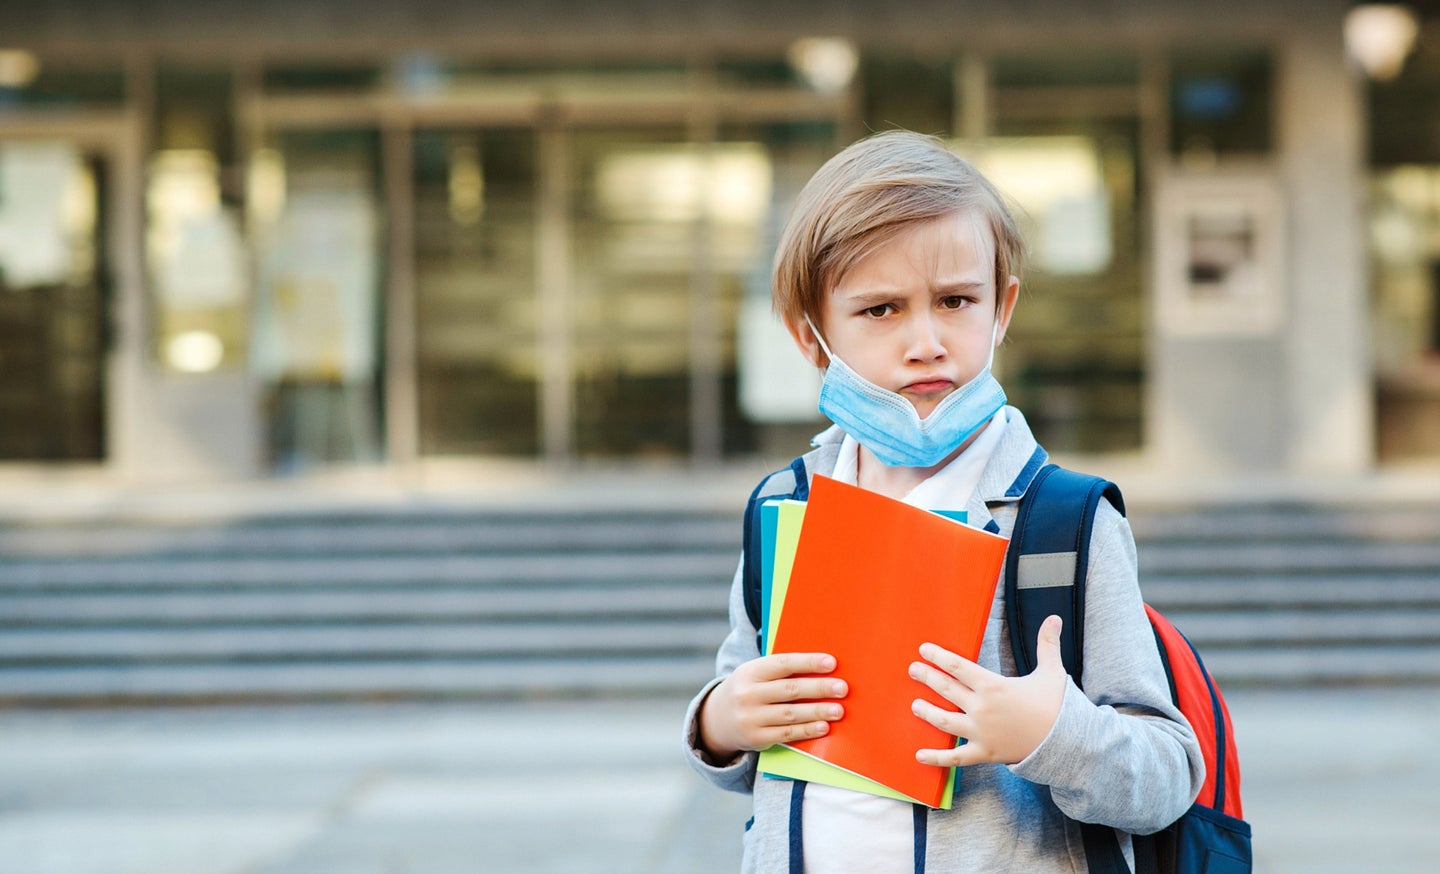 Kid with blonde hair wearing a blue COVID mask holding books and a backpack on the first day of school